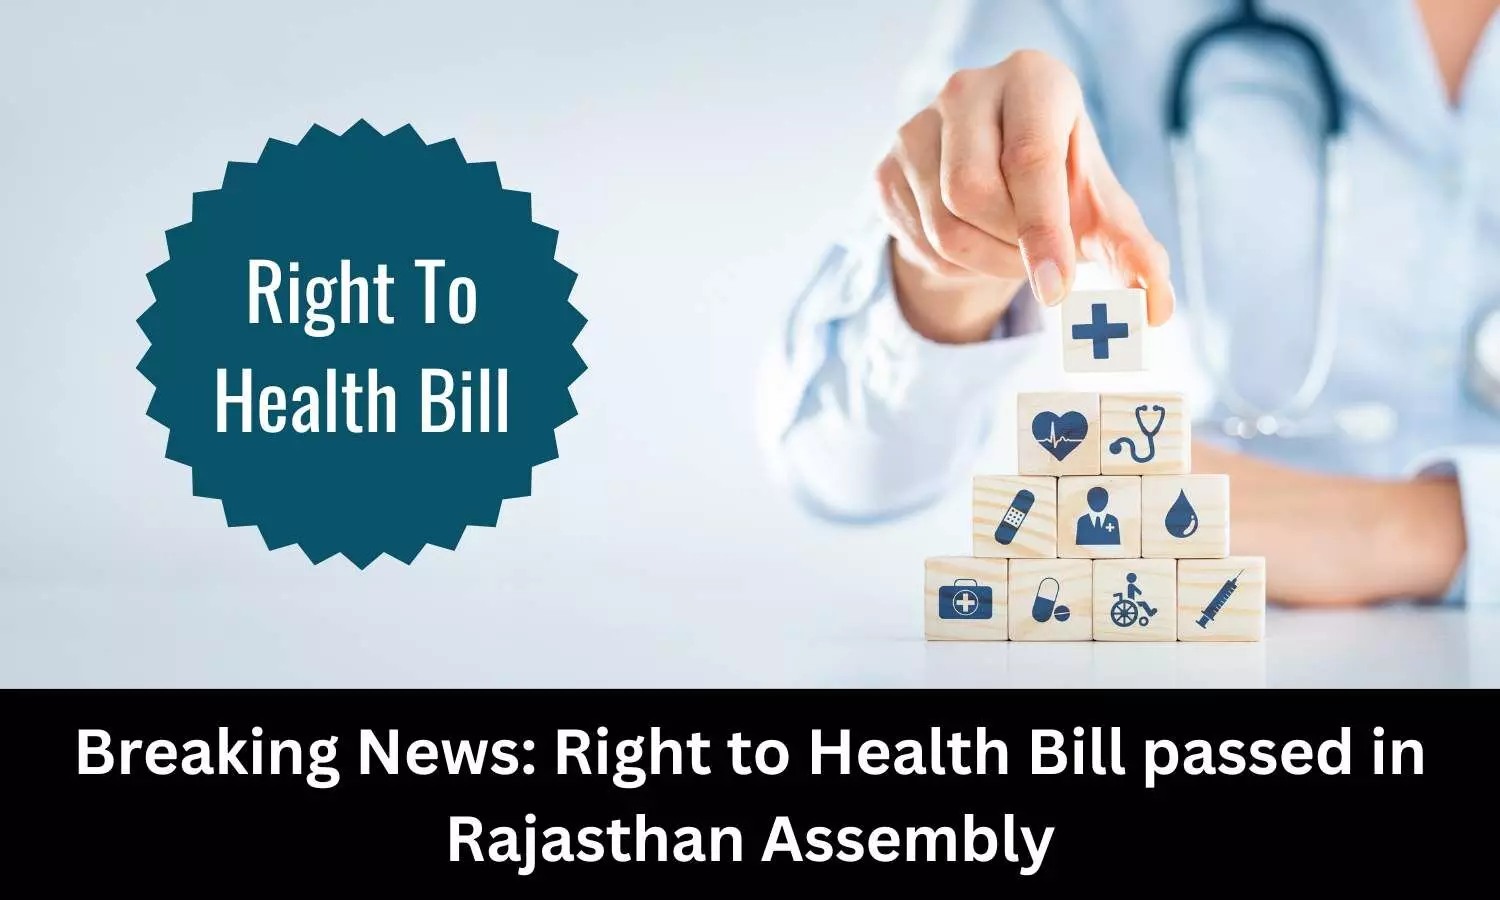 Rajasthan Assembly passes Right to Health Bill